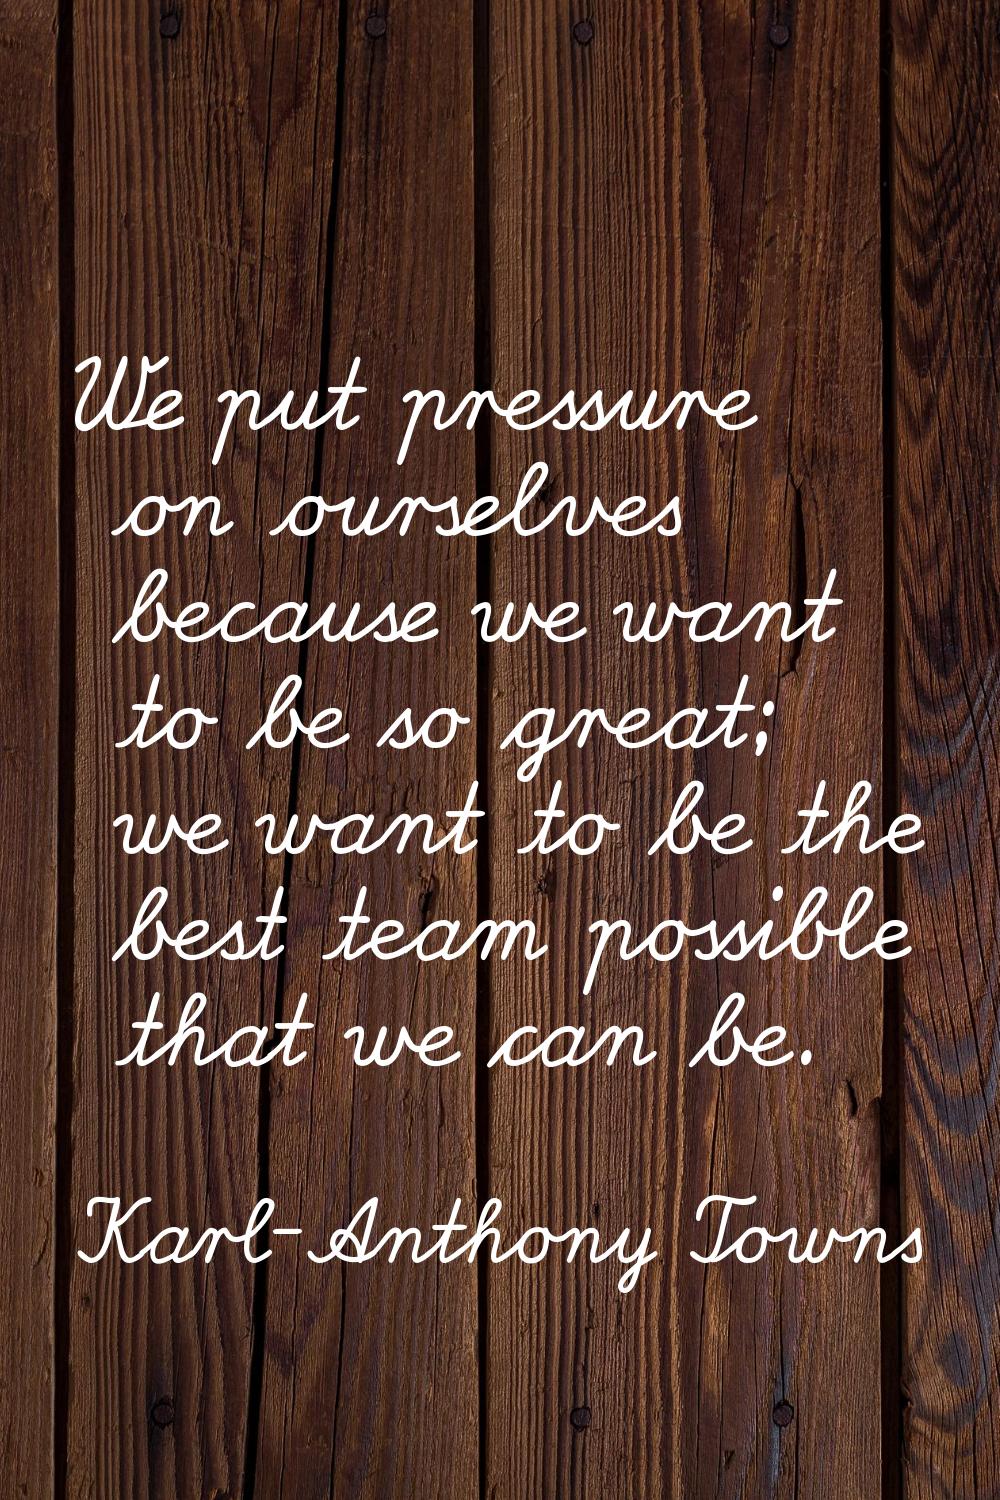 We put pressure on ourselves because we want to be so great; we want to be the best team possible t